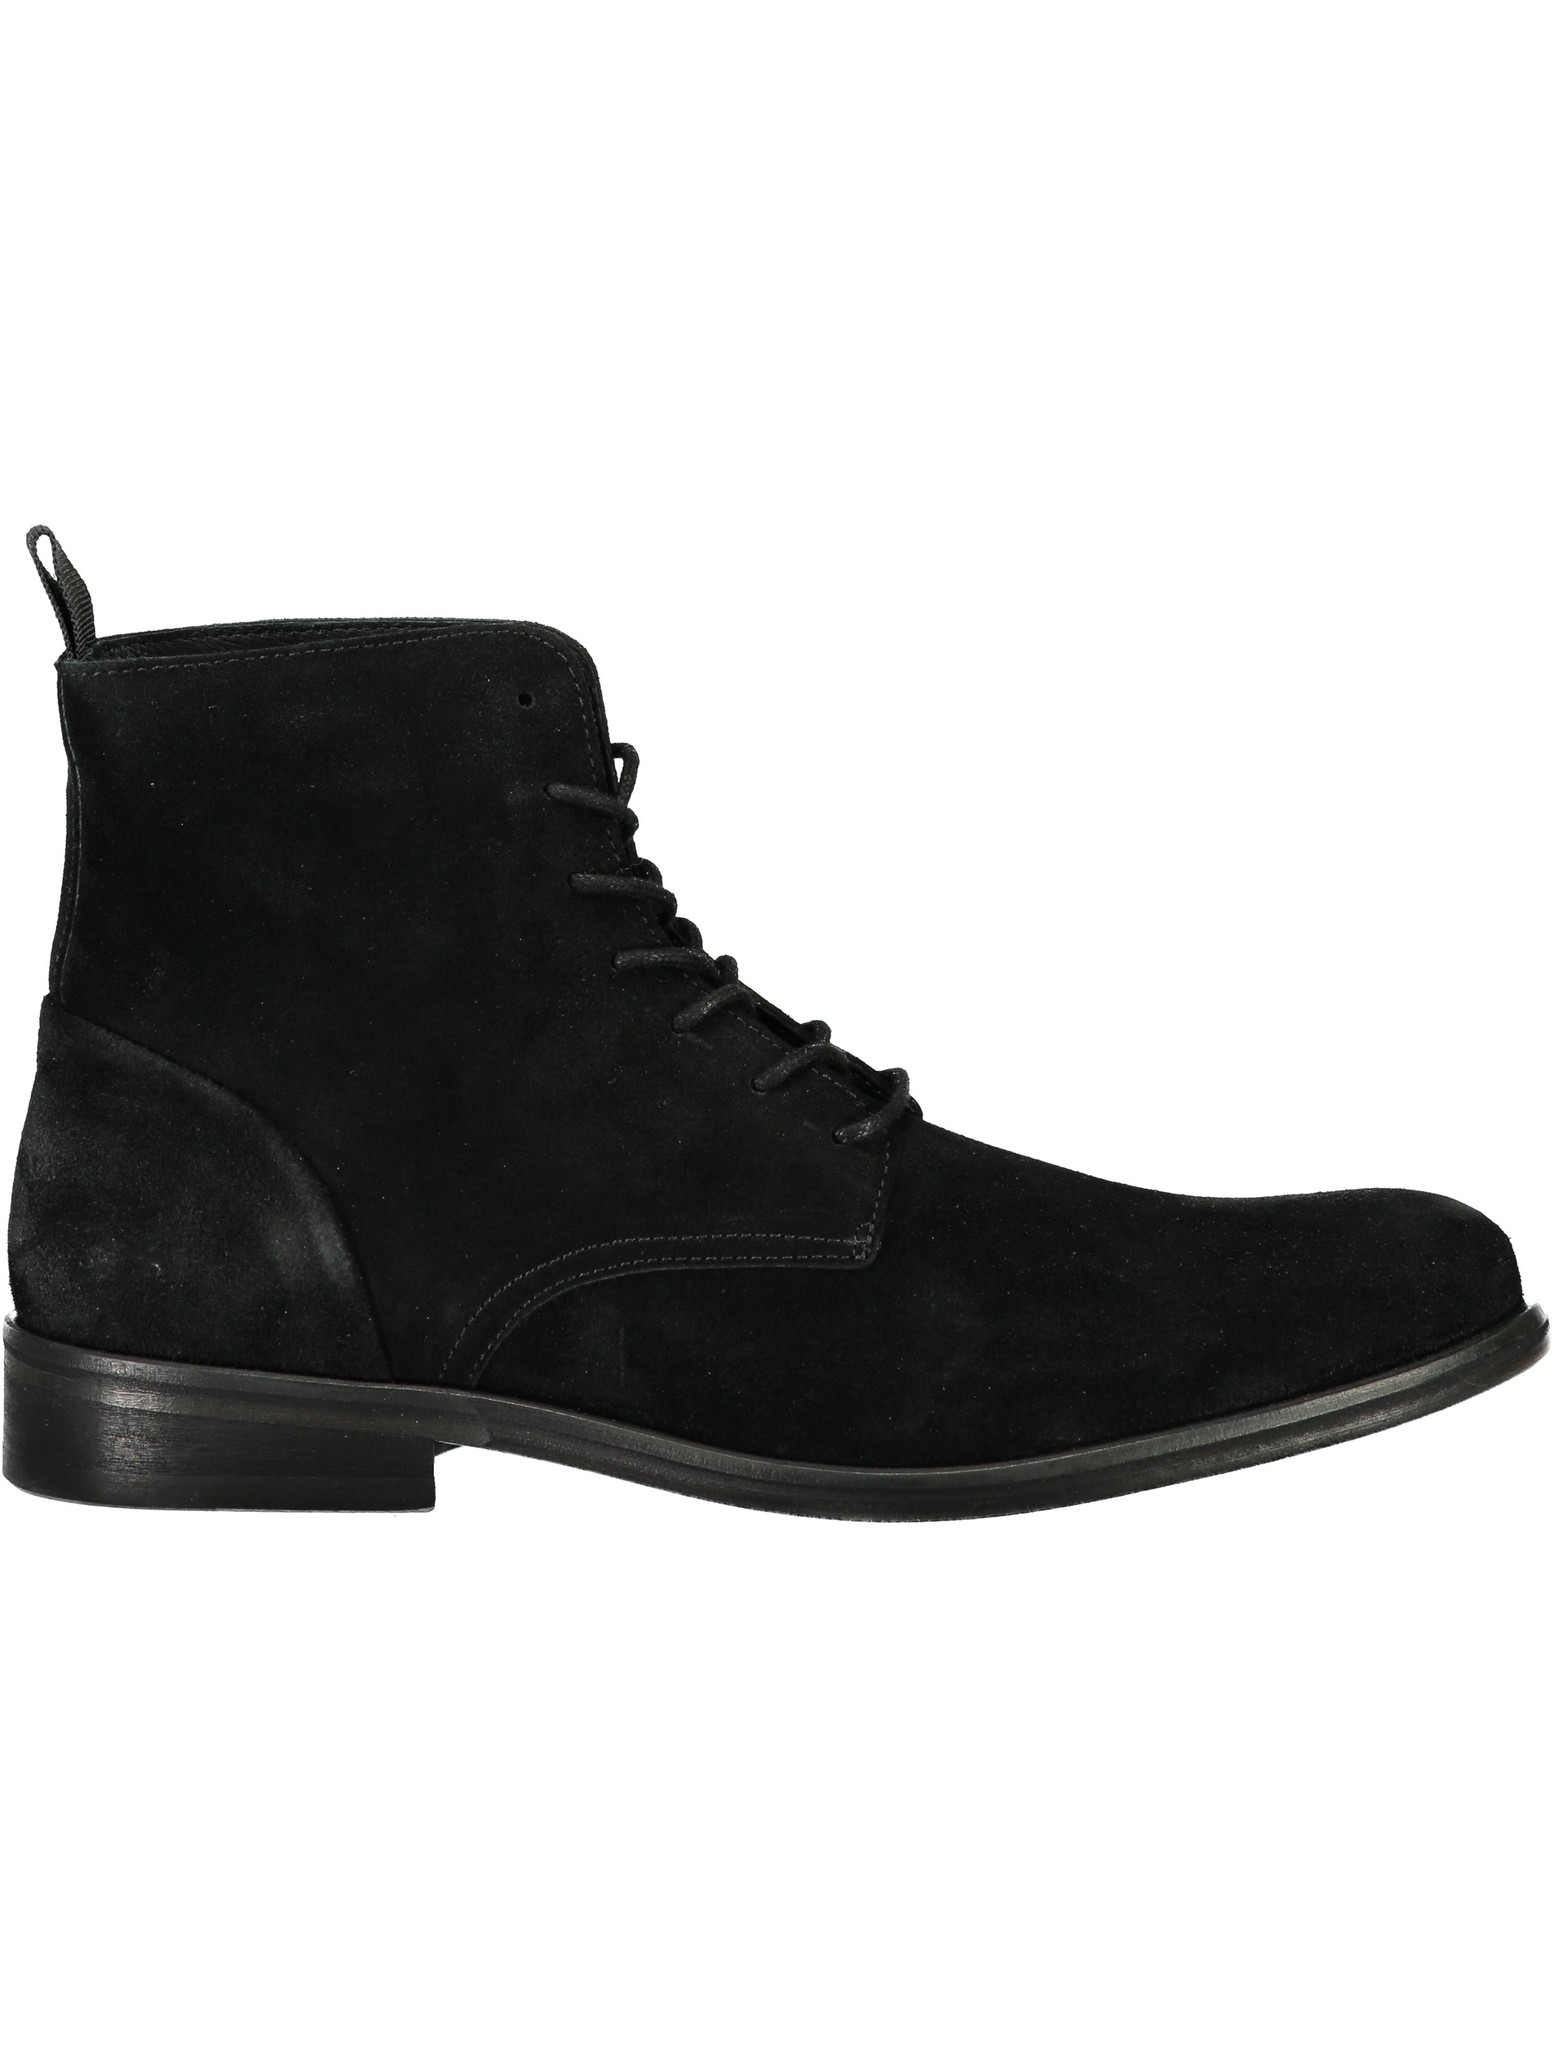 Suede Lace Up Boots: 60-91507 - LINDBERGH